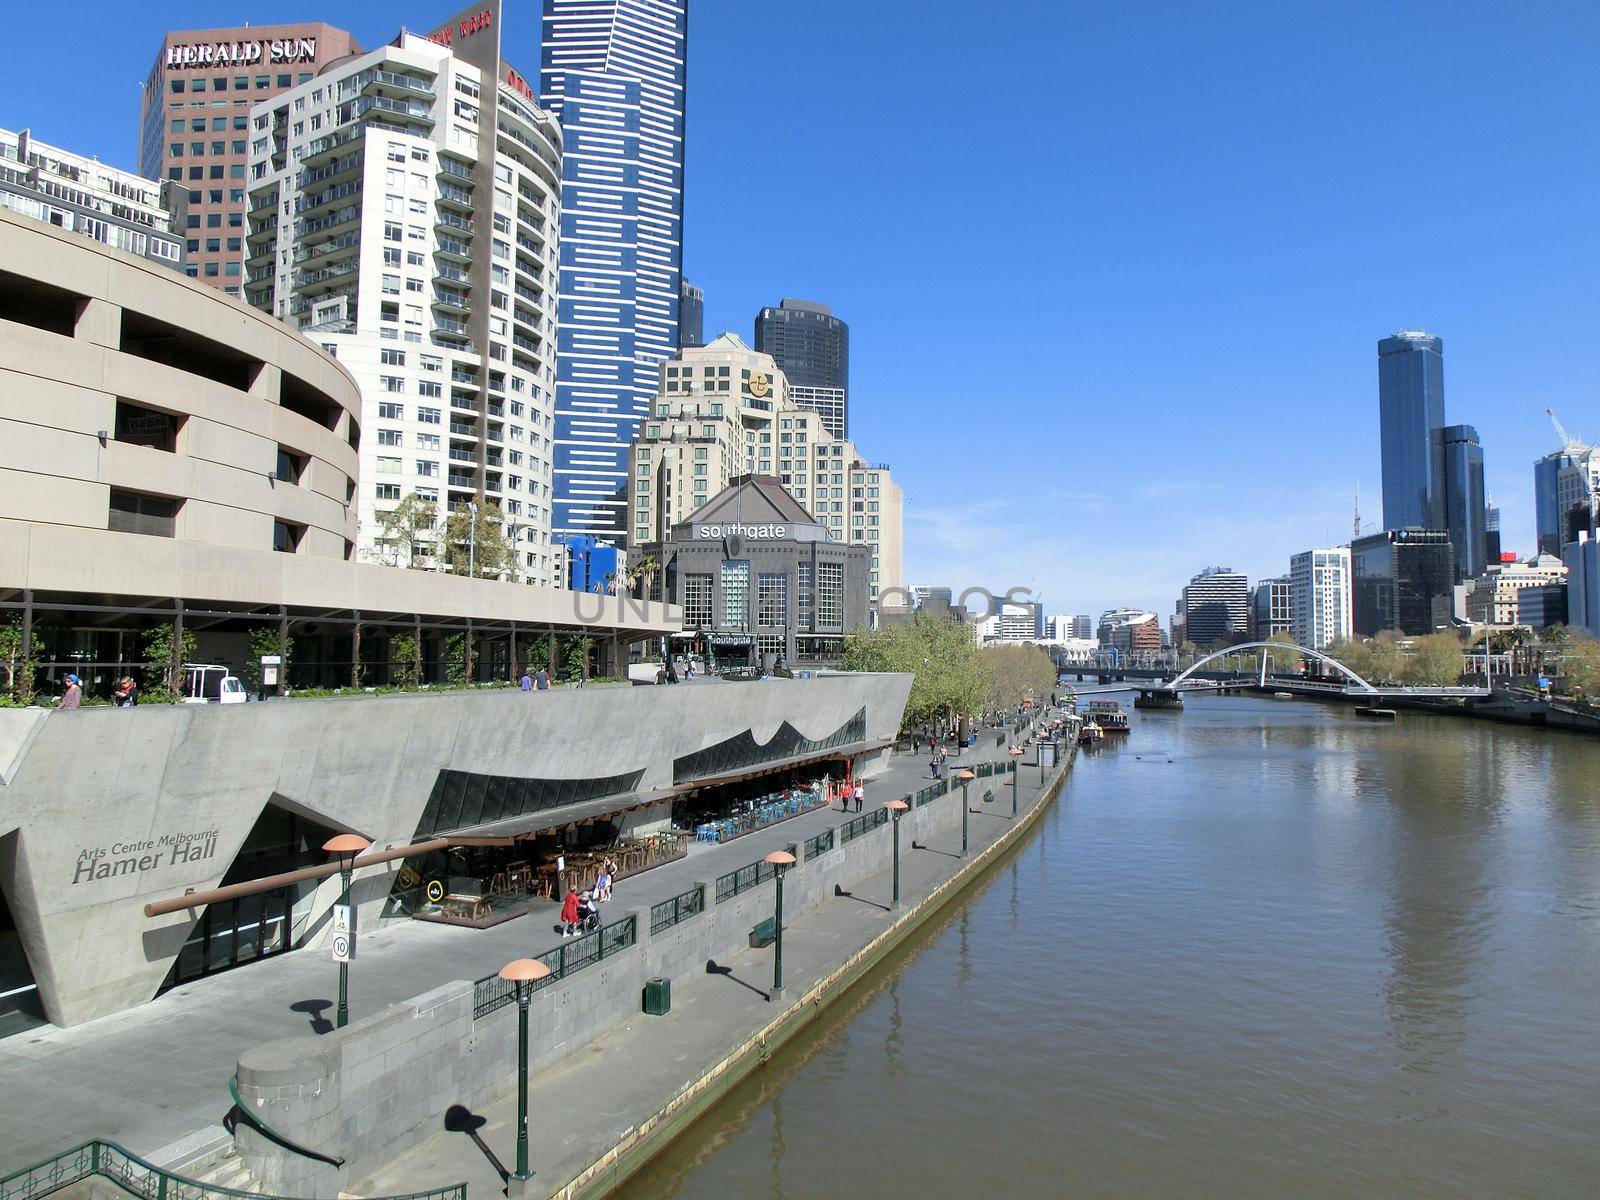 A view of the Yarra River, Melbourne, Victoria, Australia by bettercallcurry